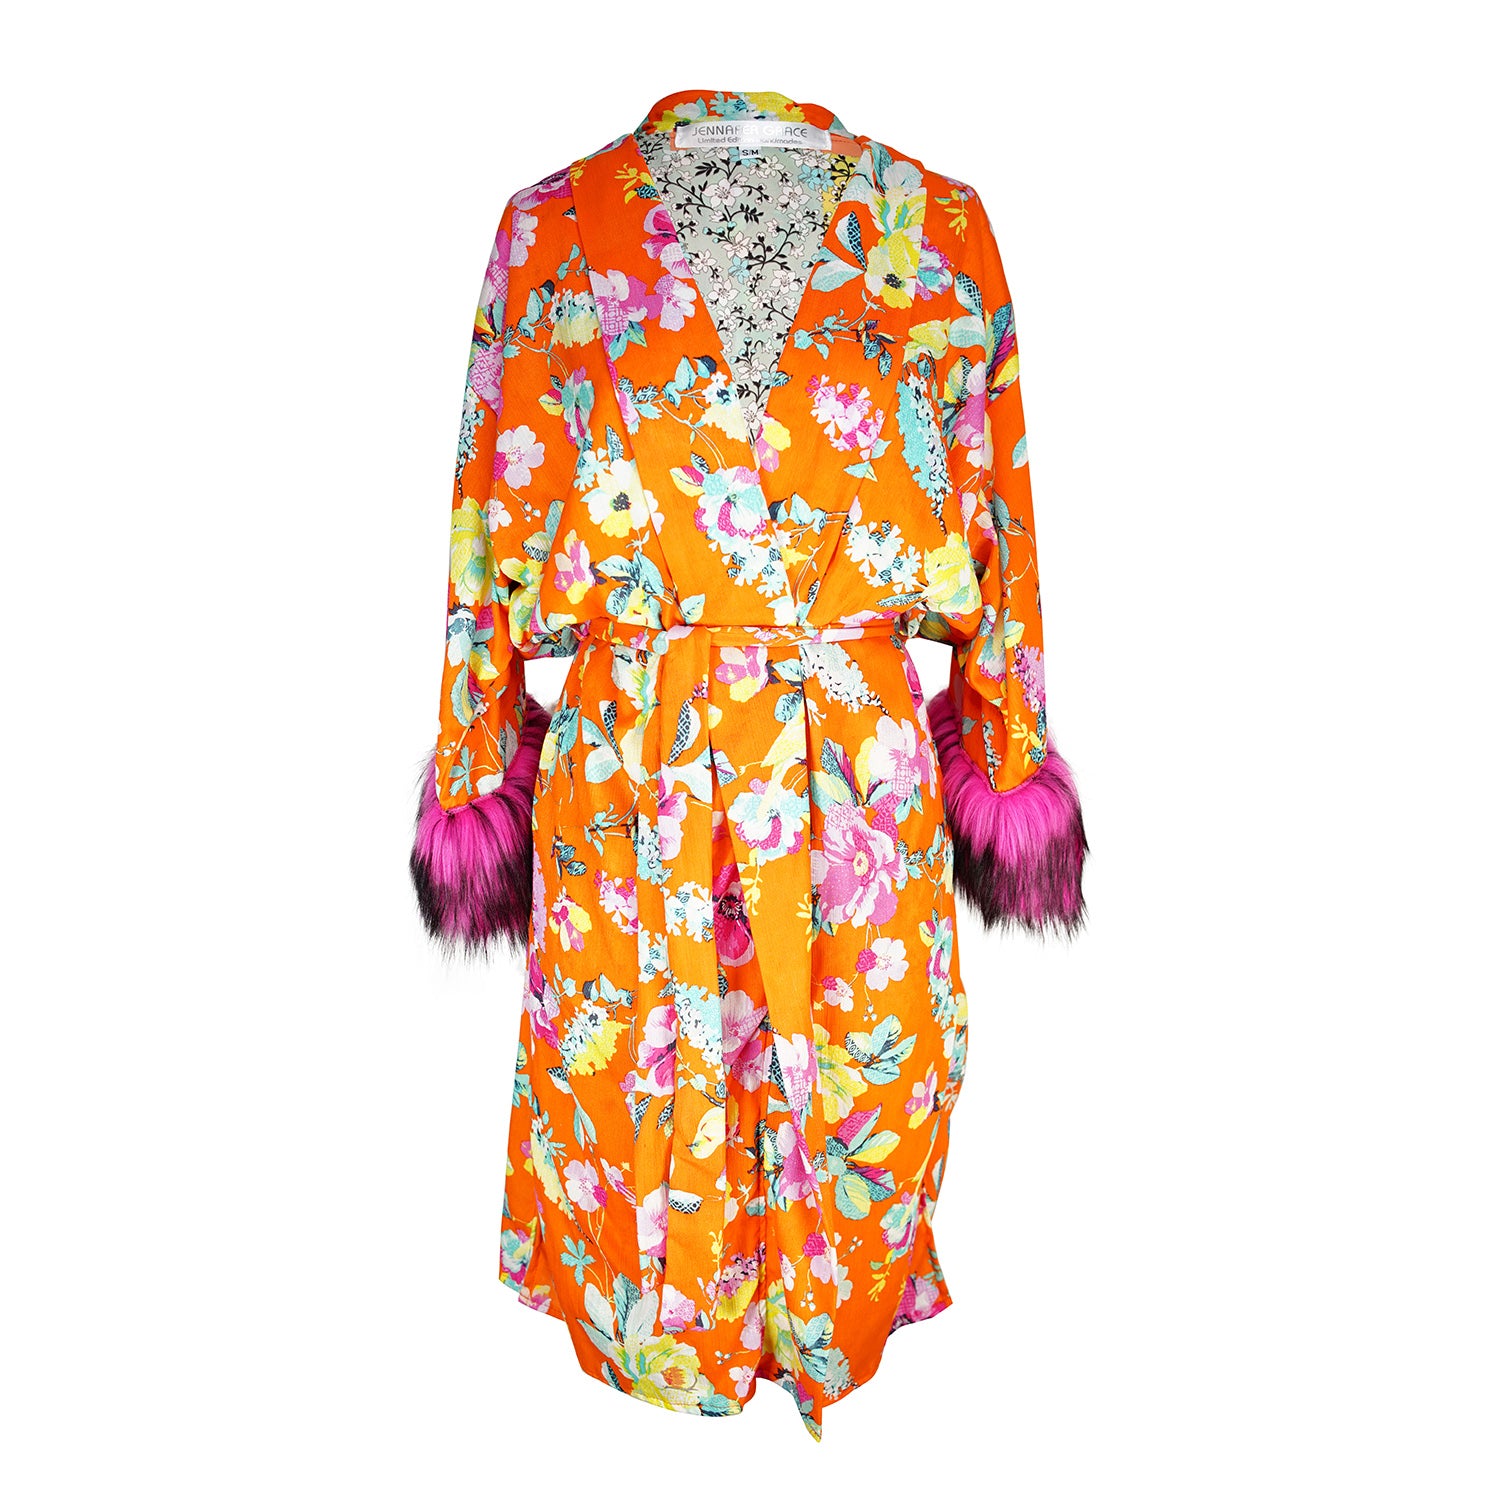 jennafer grace Neo Flora Faux Fur Koi Kimono neon orange floral pink yellow blue flowers contrast lining hot pink fuchsia faux fur cuffs duster jacket robe retro 90s revival boho bohemian romantic whimsical old hollywood glam unisex handmade in California USA